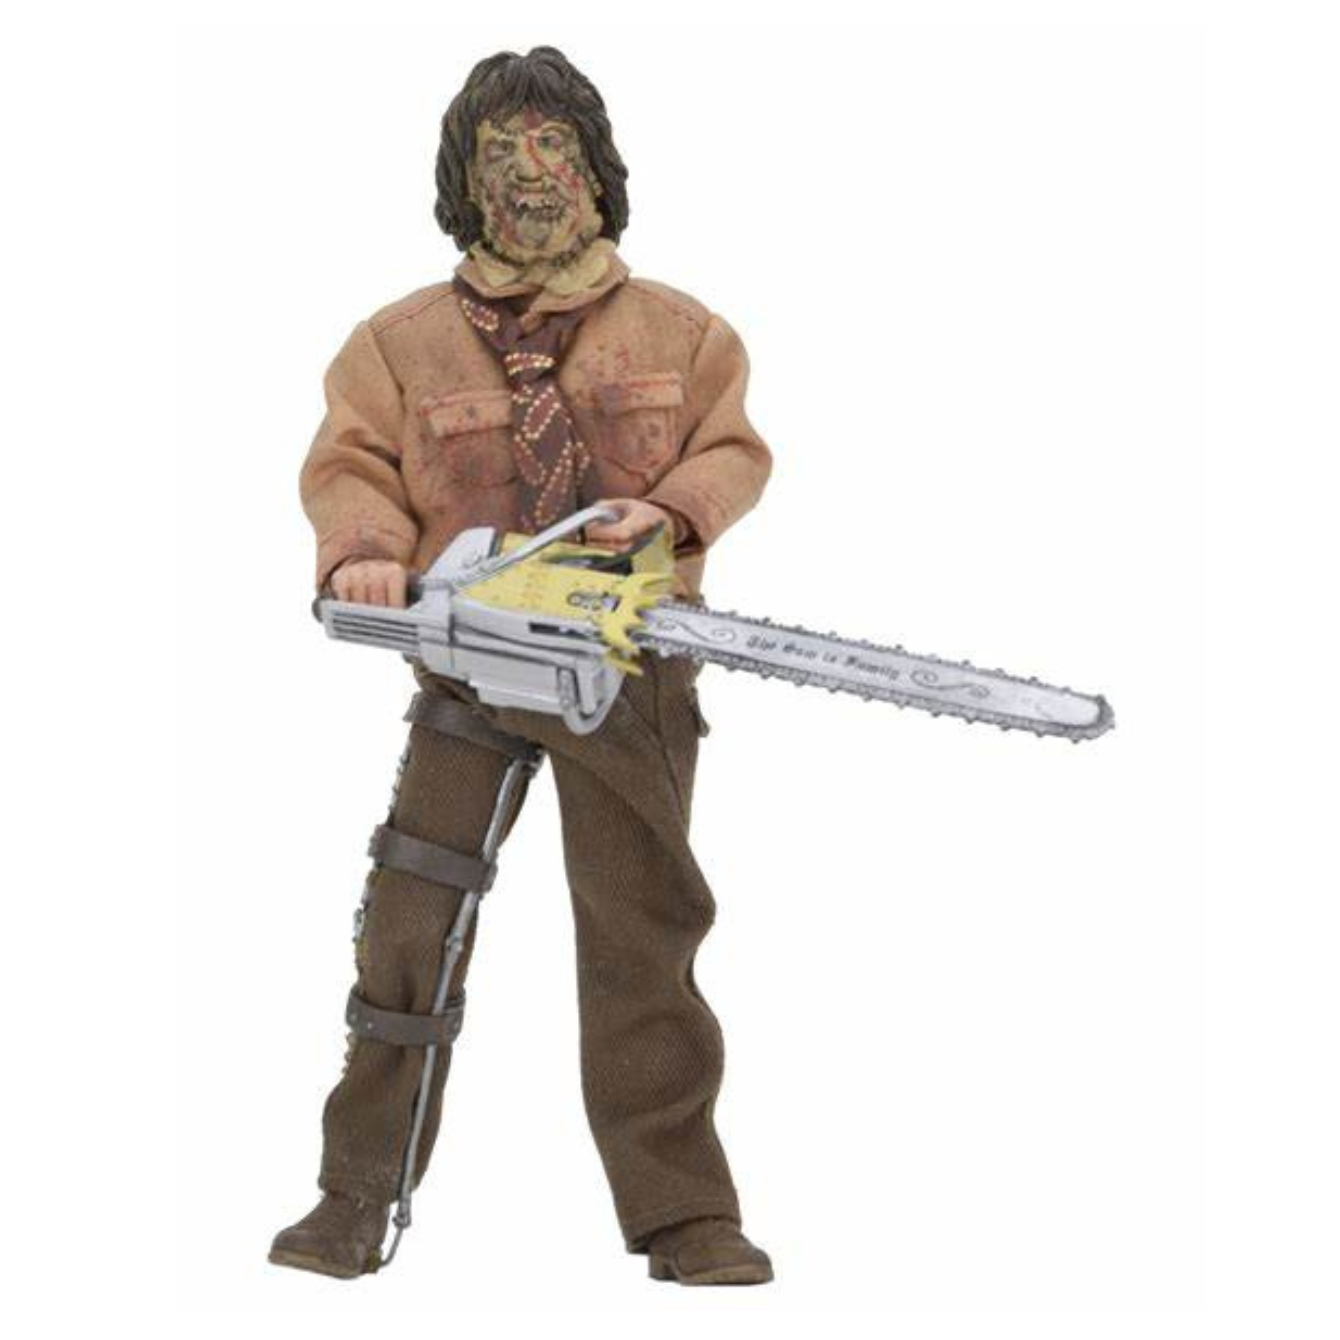 Texas Chainsaw Massacre 3 – 8” Clothed Action Figure – Leatherface